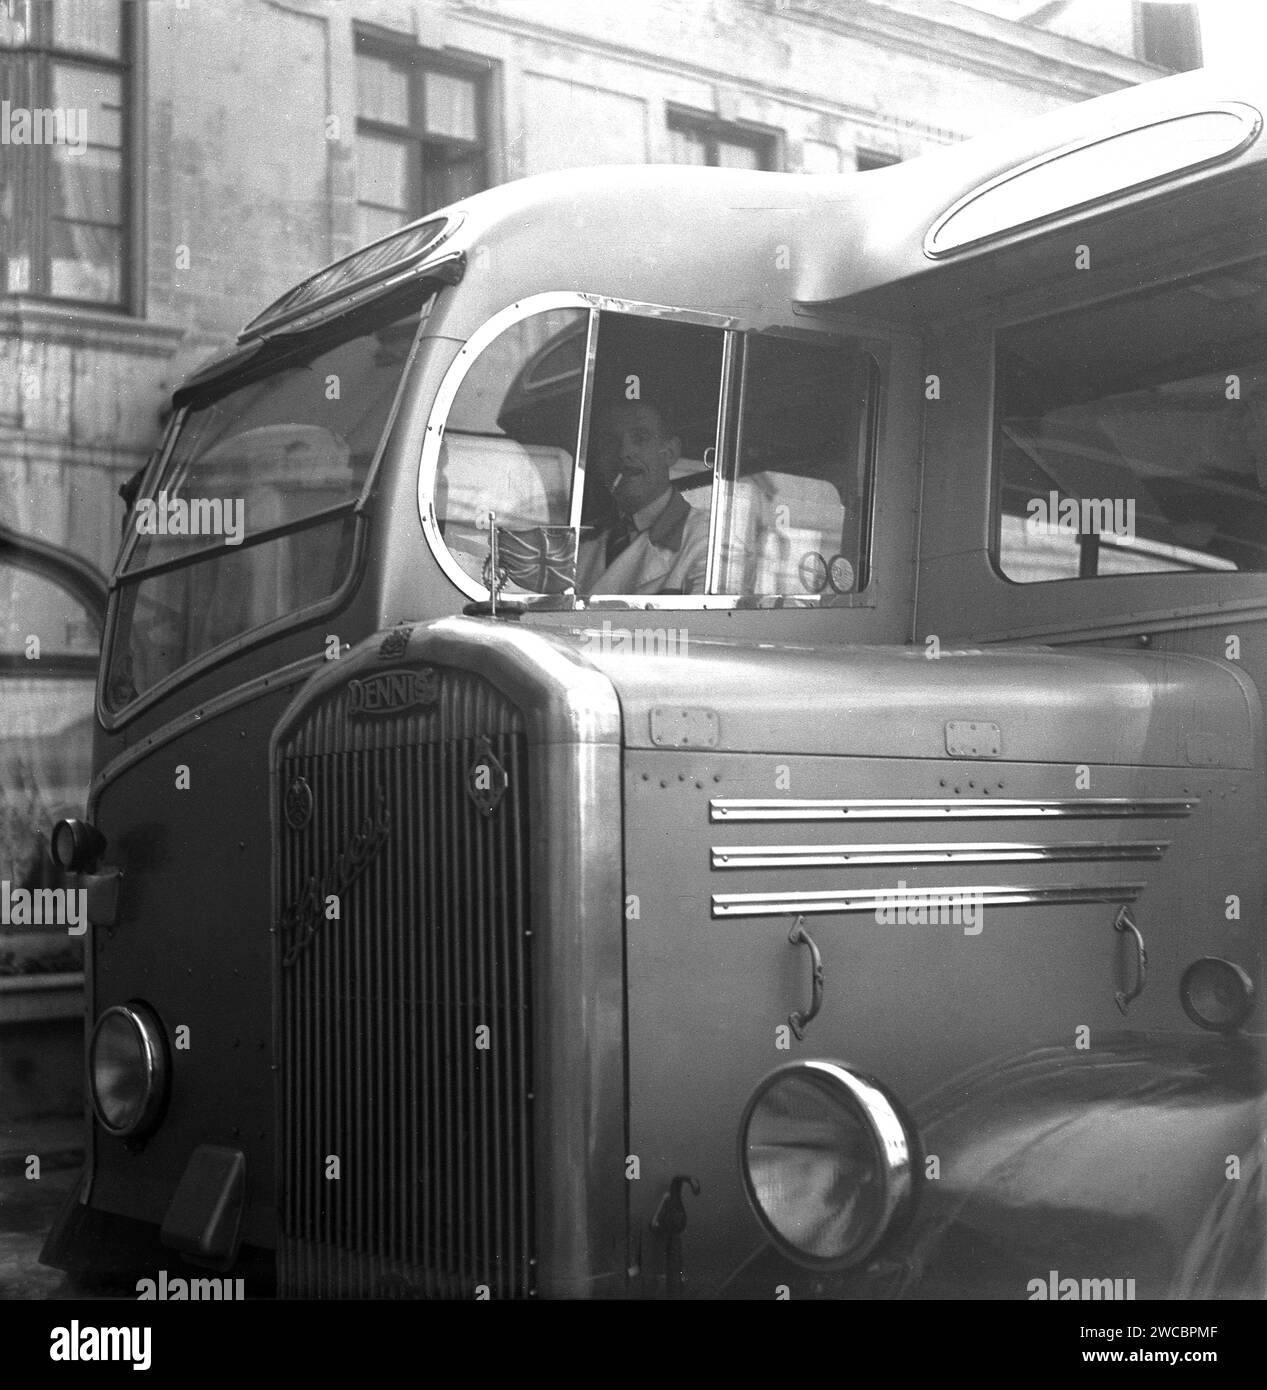 1950, historical, view of the grille and cabin with driver of a Dennis motor coach or bus, a Dennis Lancet III with Duple body, Brussels, Belgium. A union jack is on bonnet, with RAC and TCS badges on grille. Stock Photo